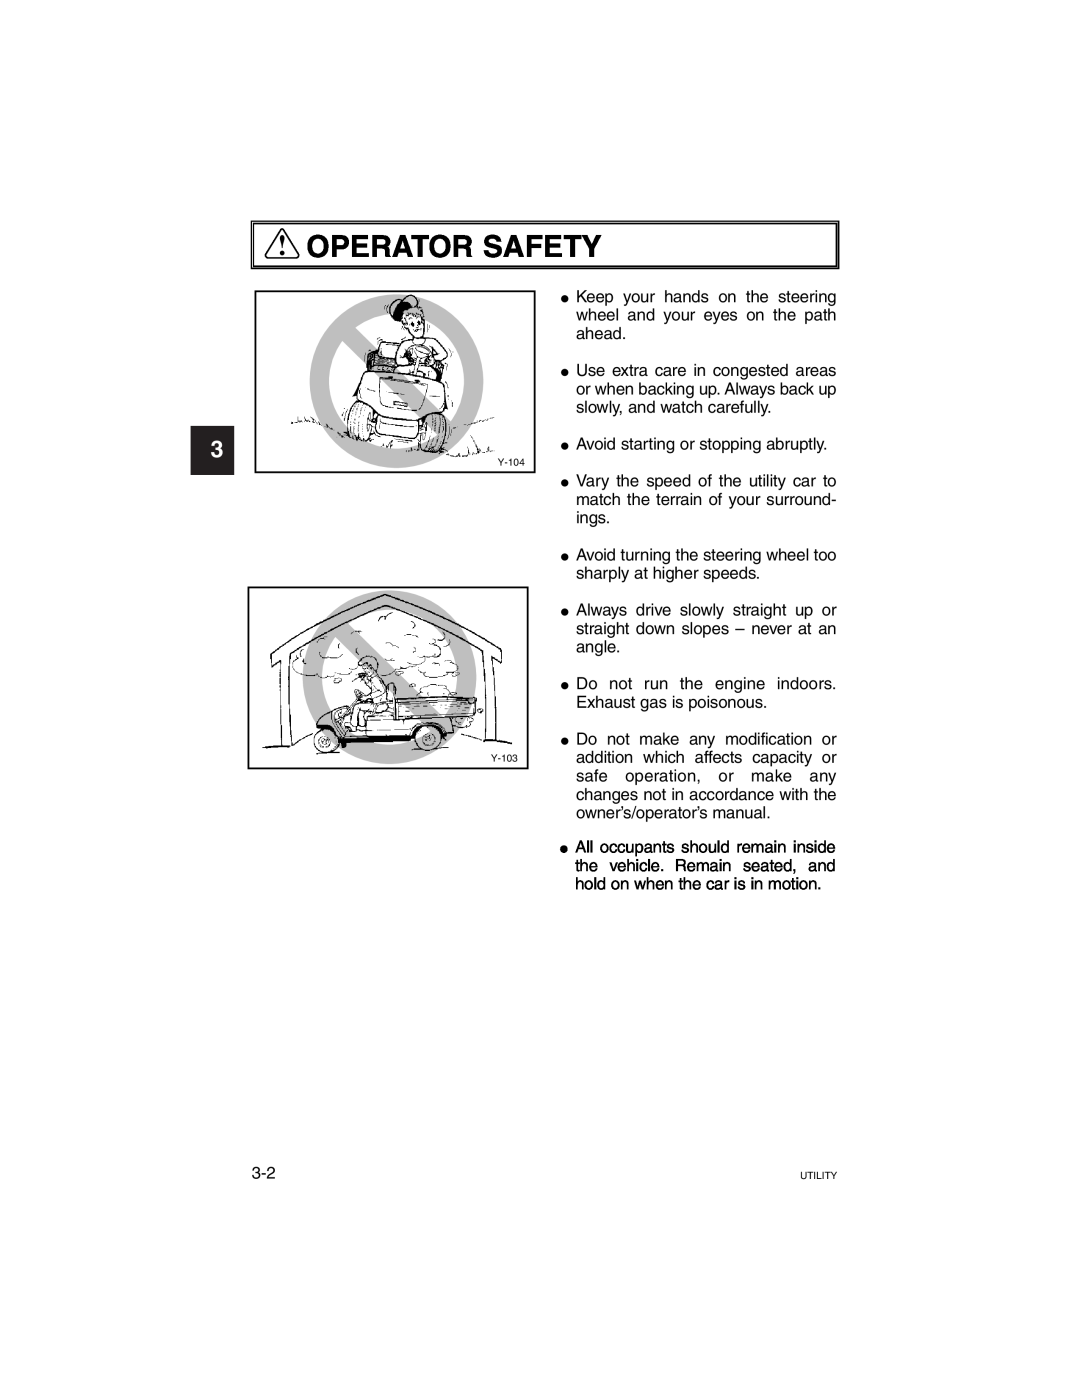 Yamaha G21A manual Operator Safety, 1 2 3 4 5, Avoid starting or stopping abruptly 